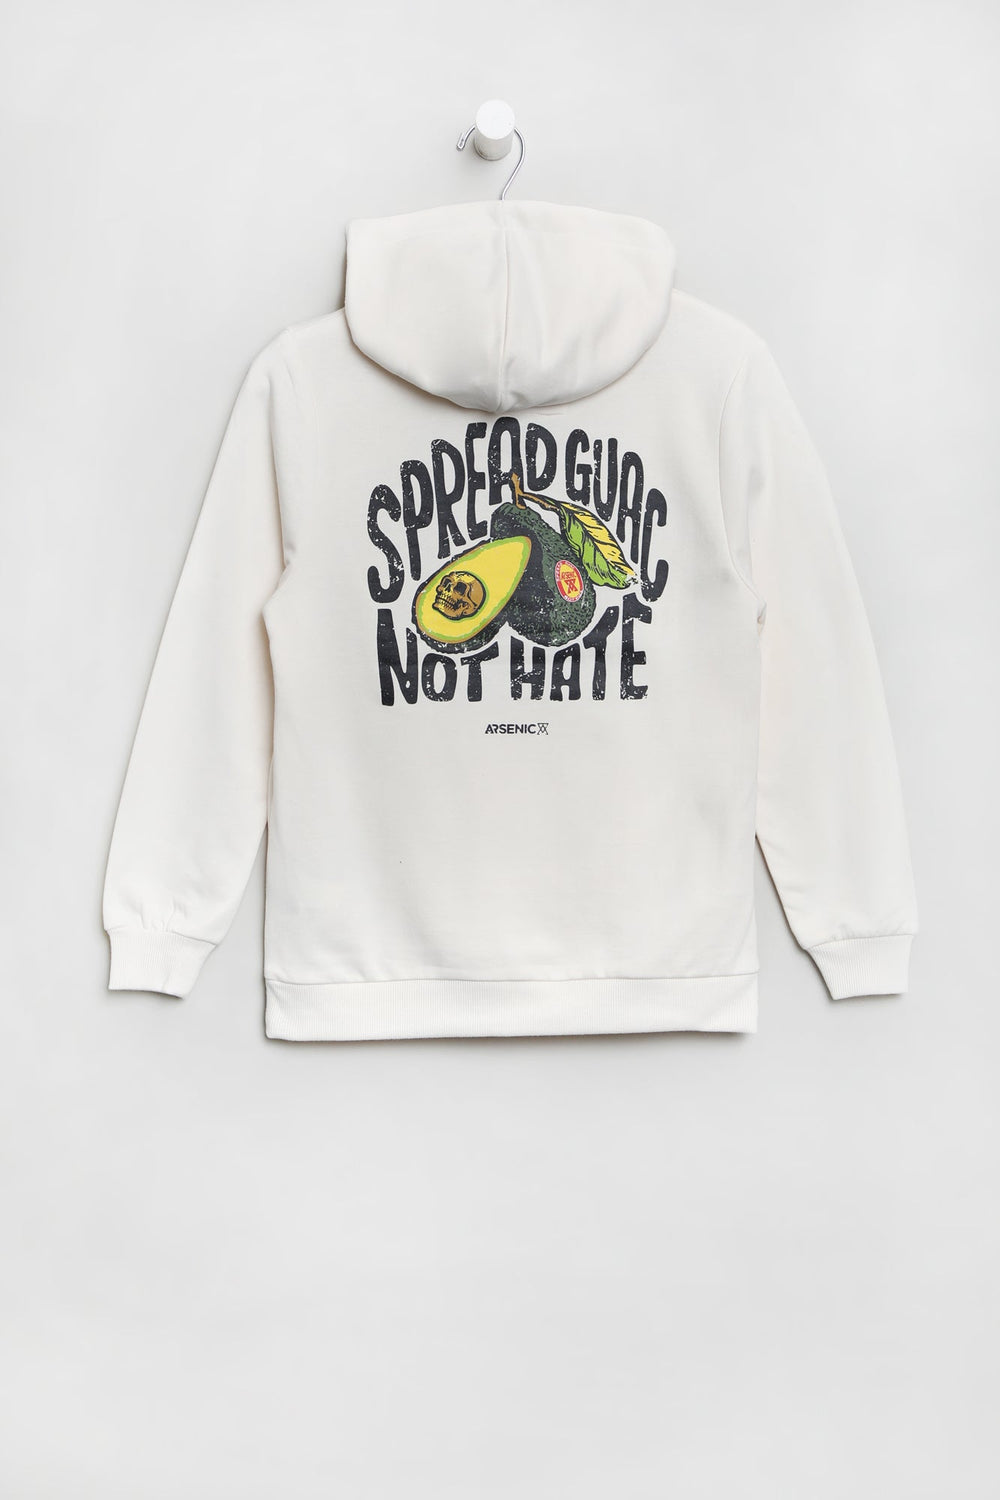 Arsenic Youth Spread Guac Not Hate Hoodie Arsenic Youth Spread Guac Not Hate Hoodie